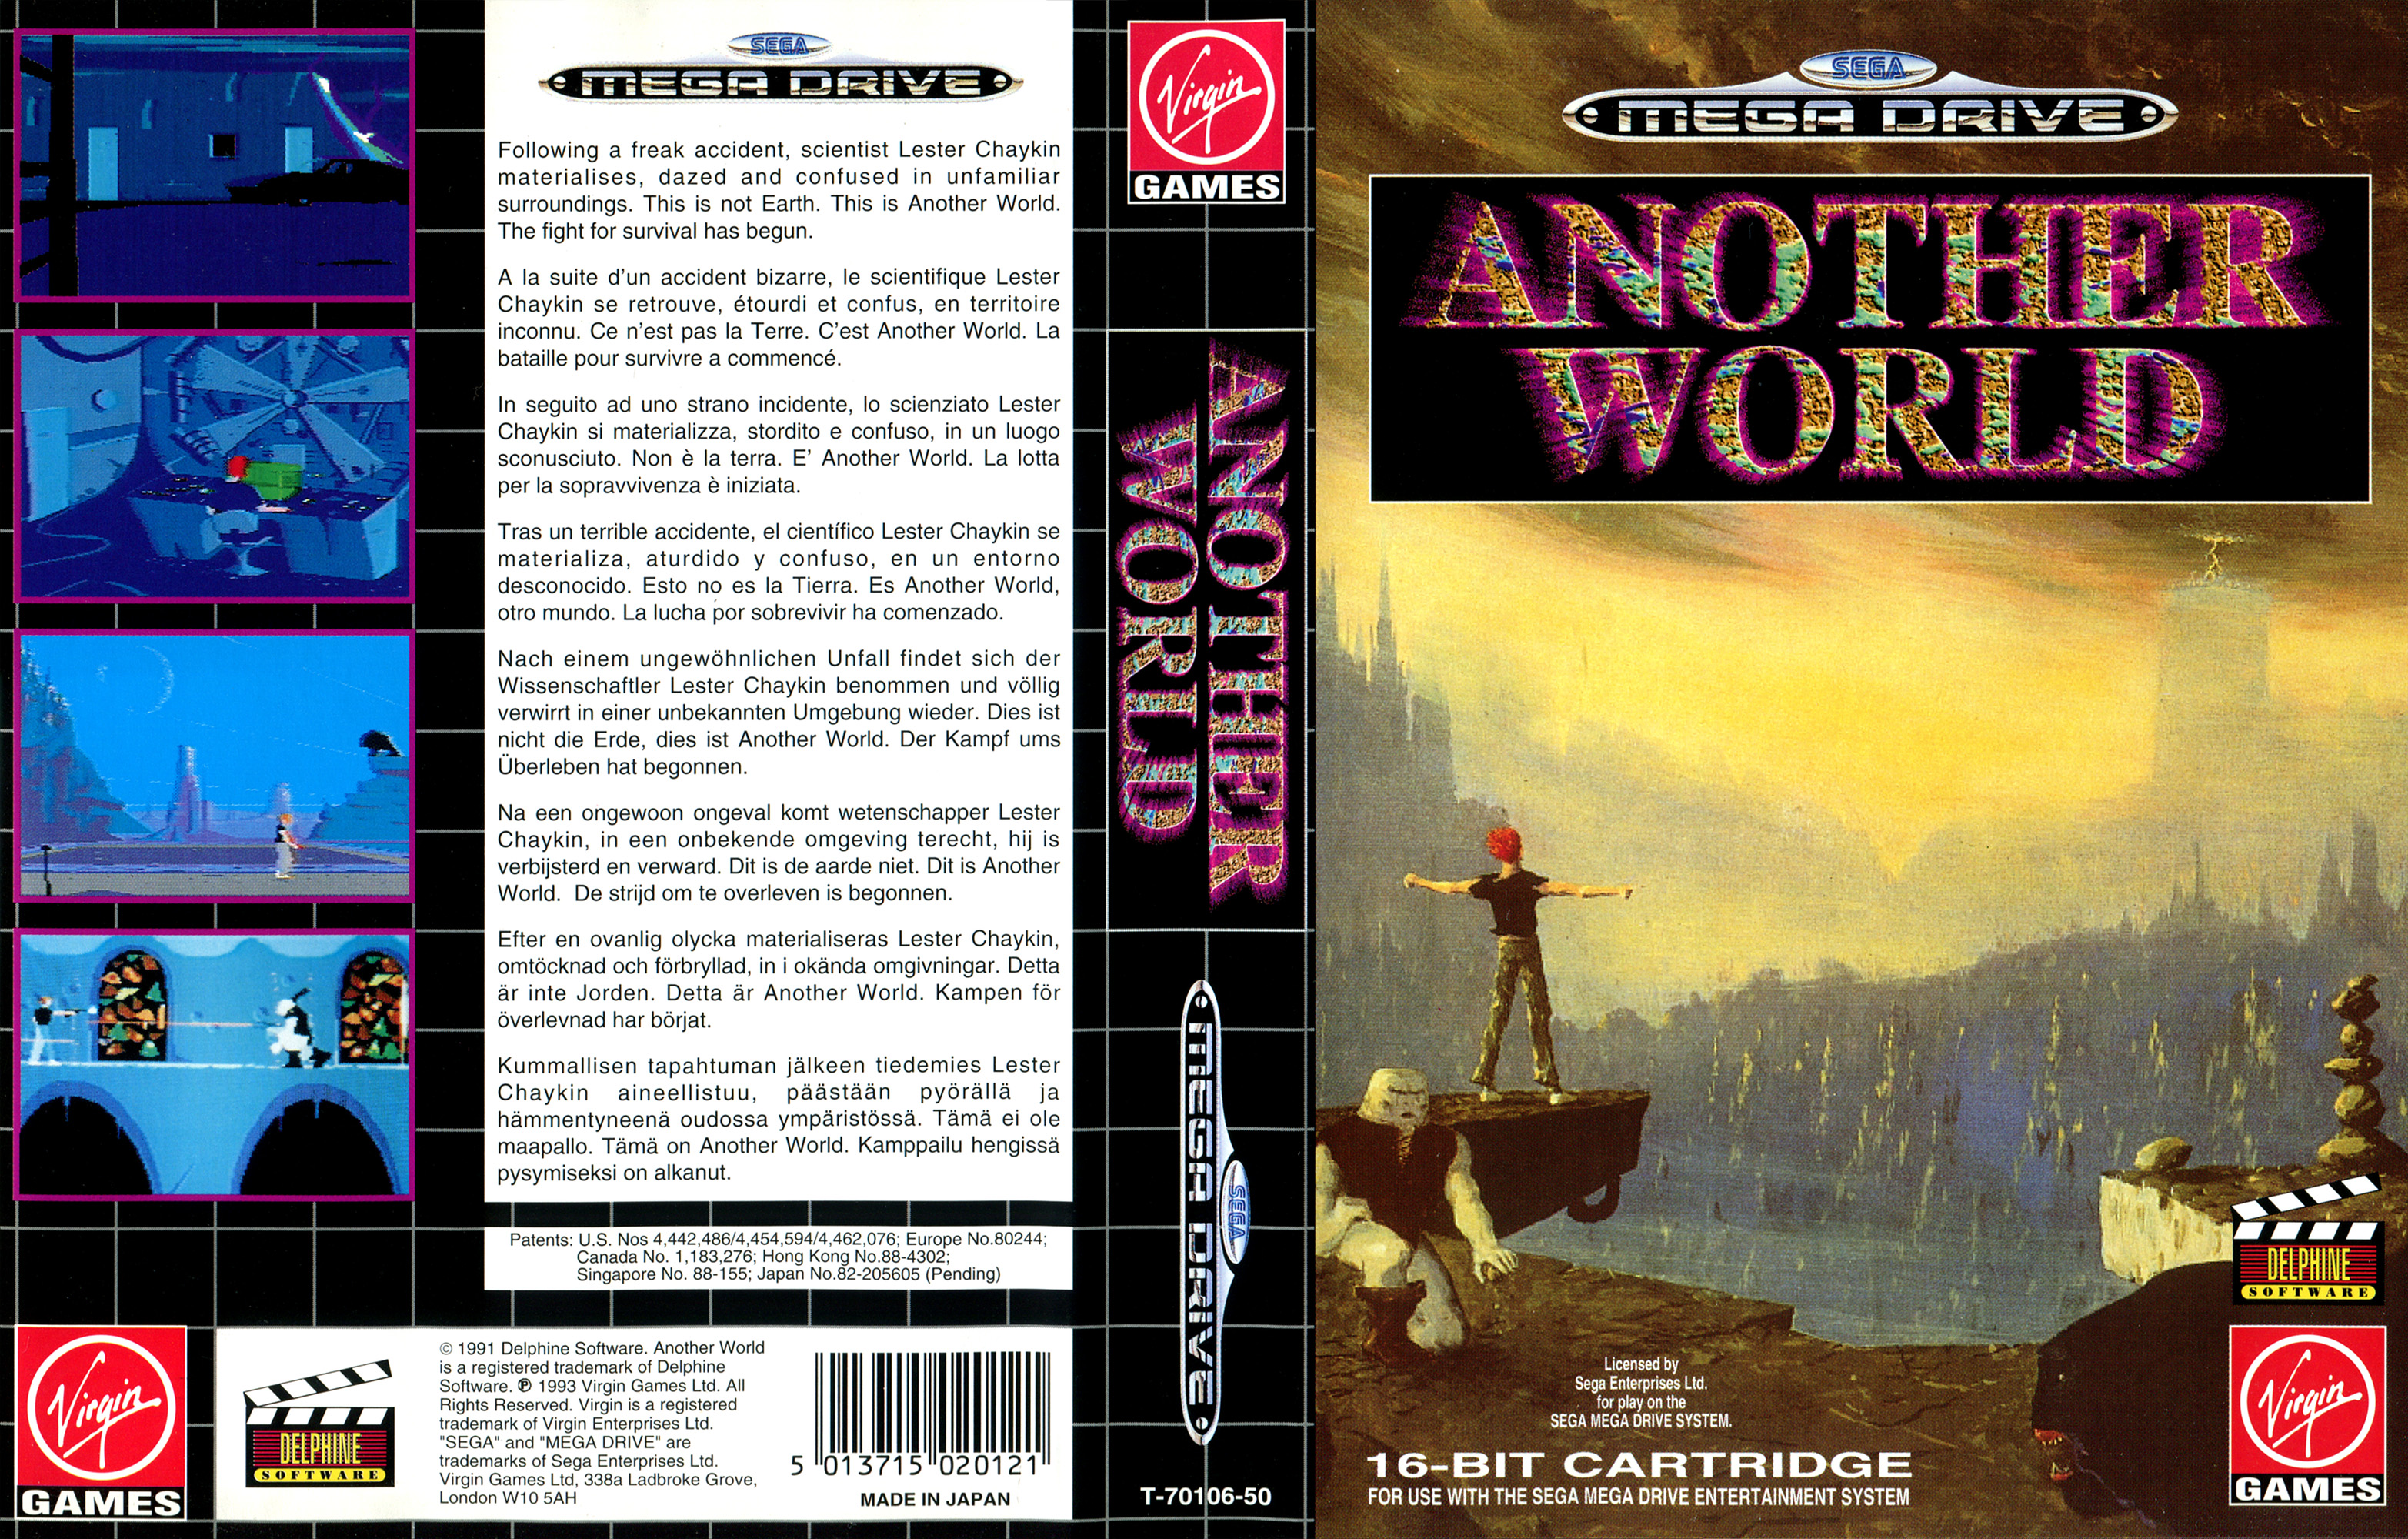 Another world на русском. Another World игра. Another World Sega. Another World Sega Mega Drive. Out of this World сега.